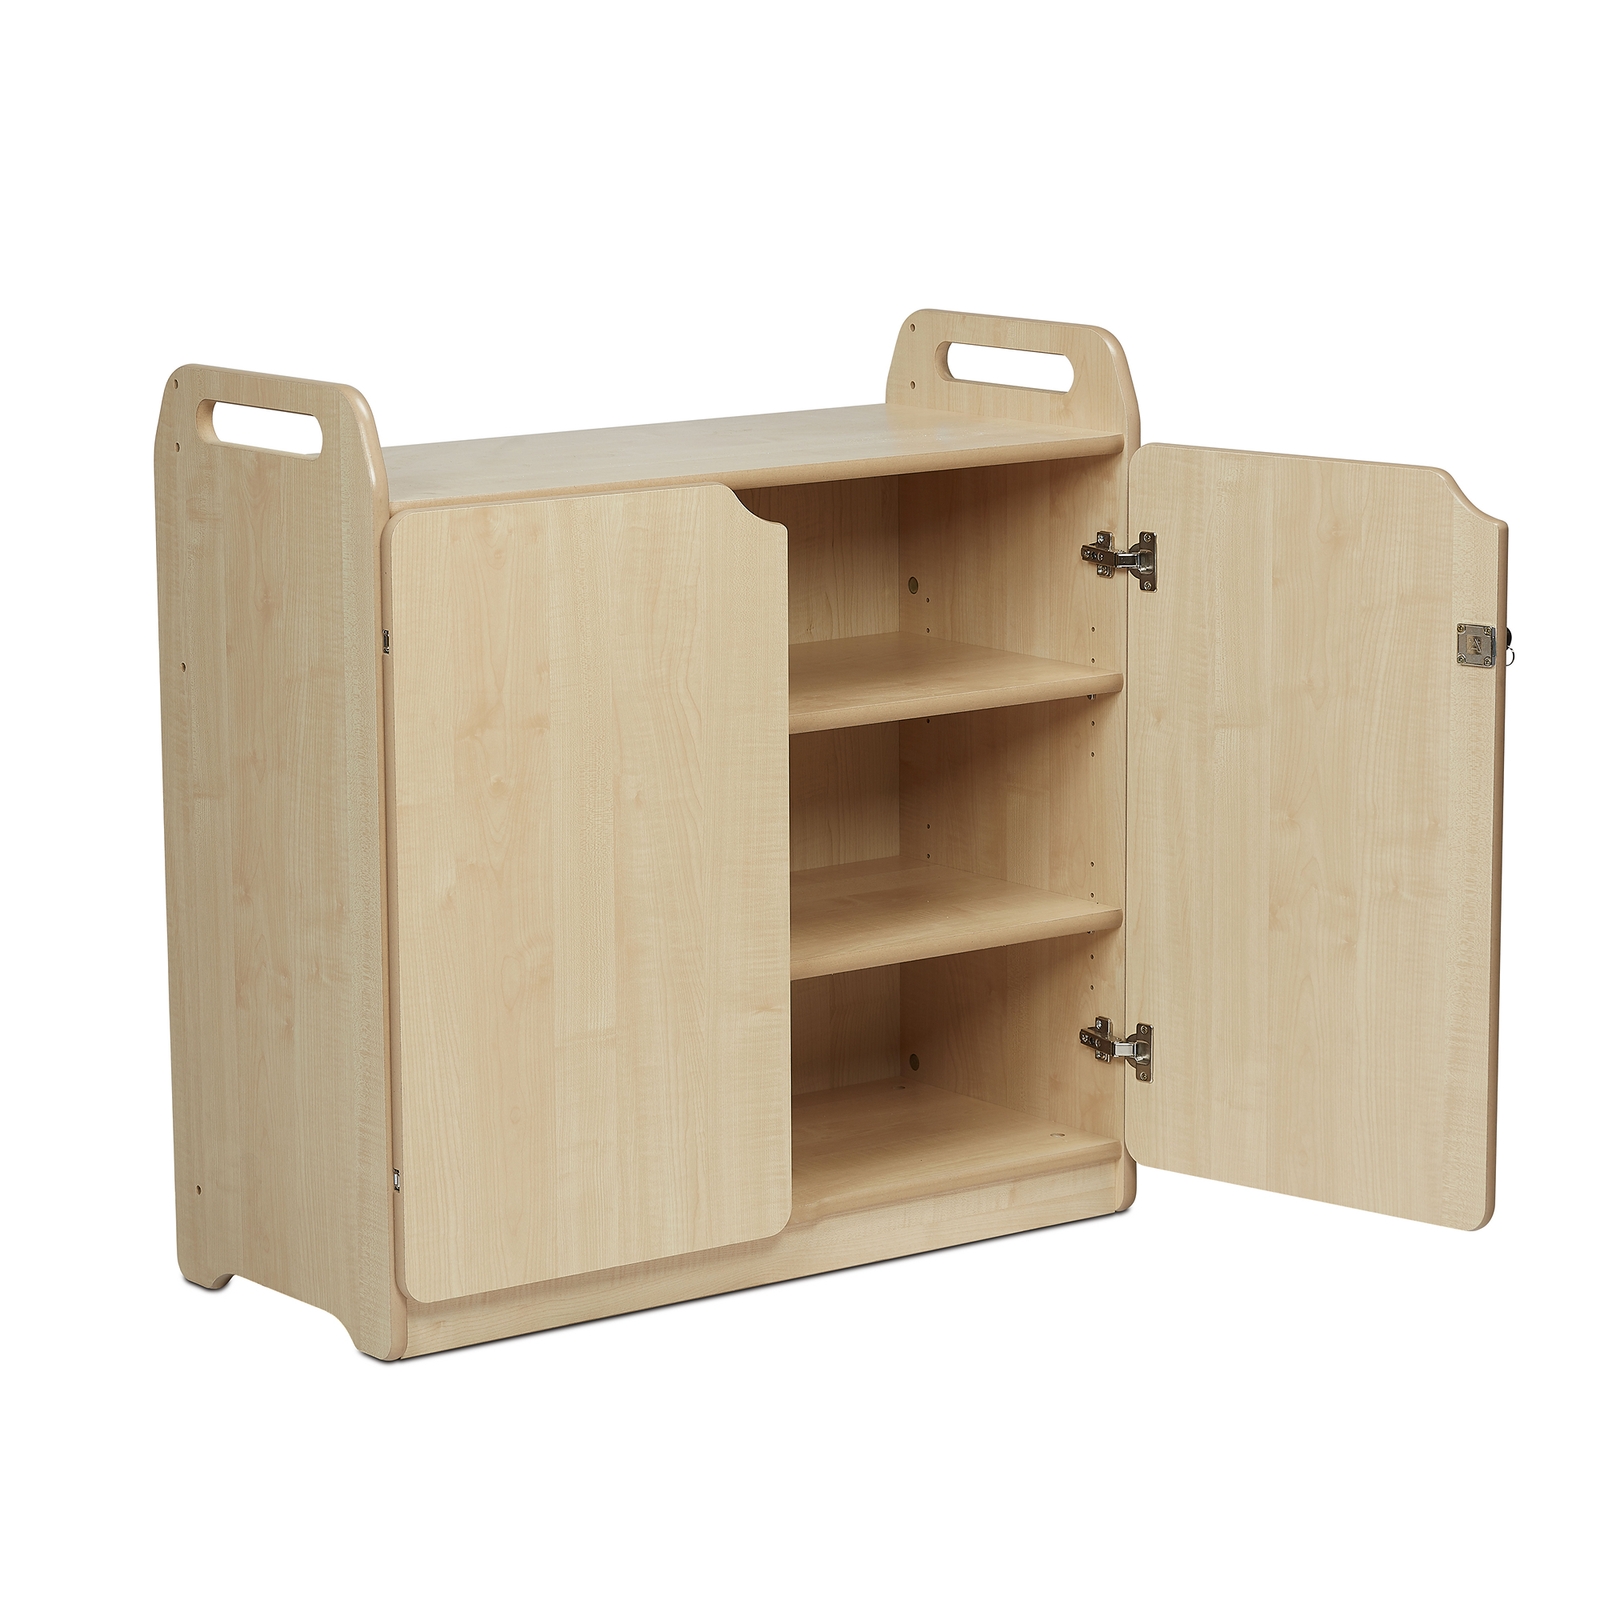 Playscapes Storage Cupboard